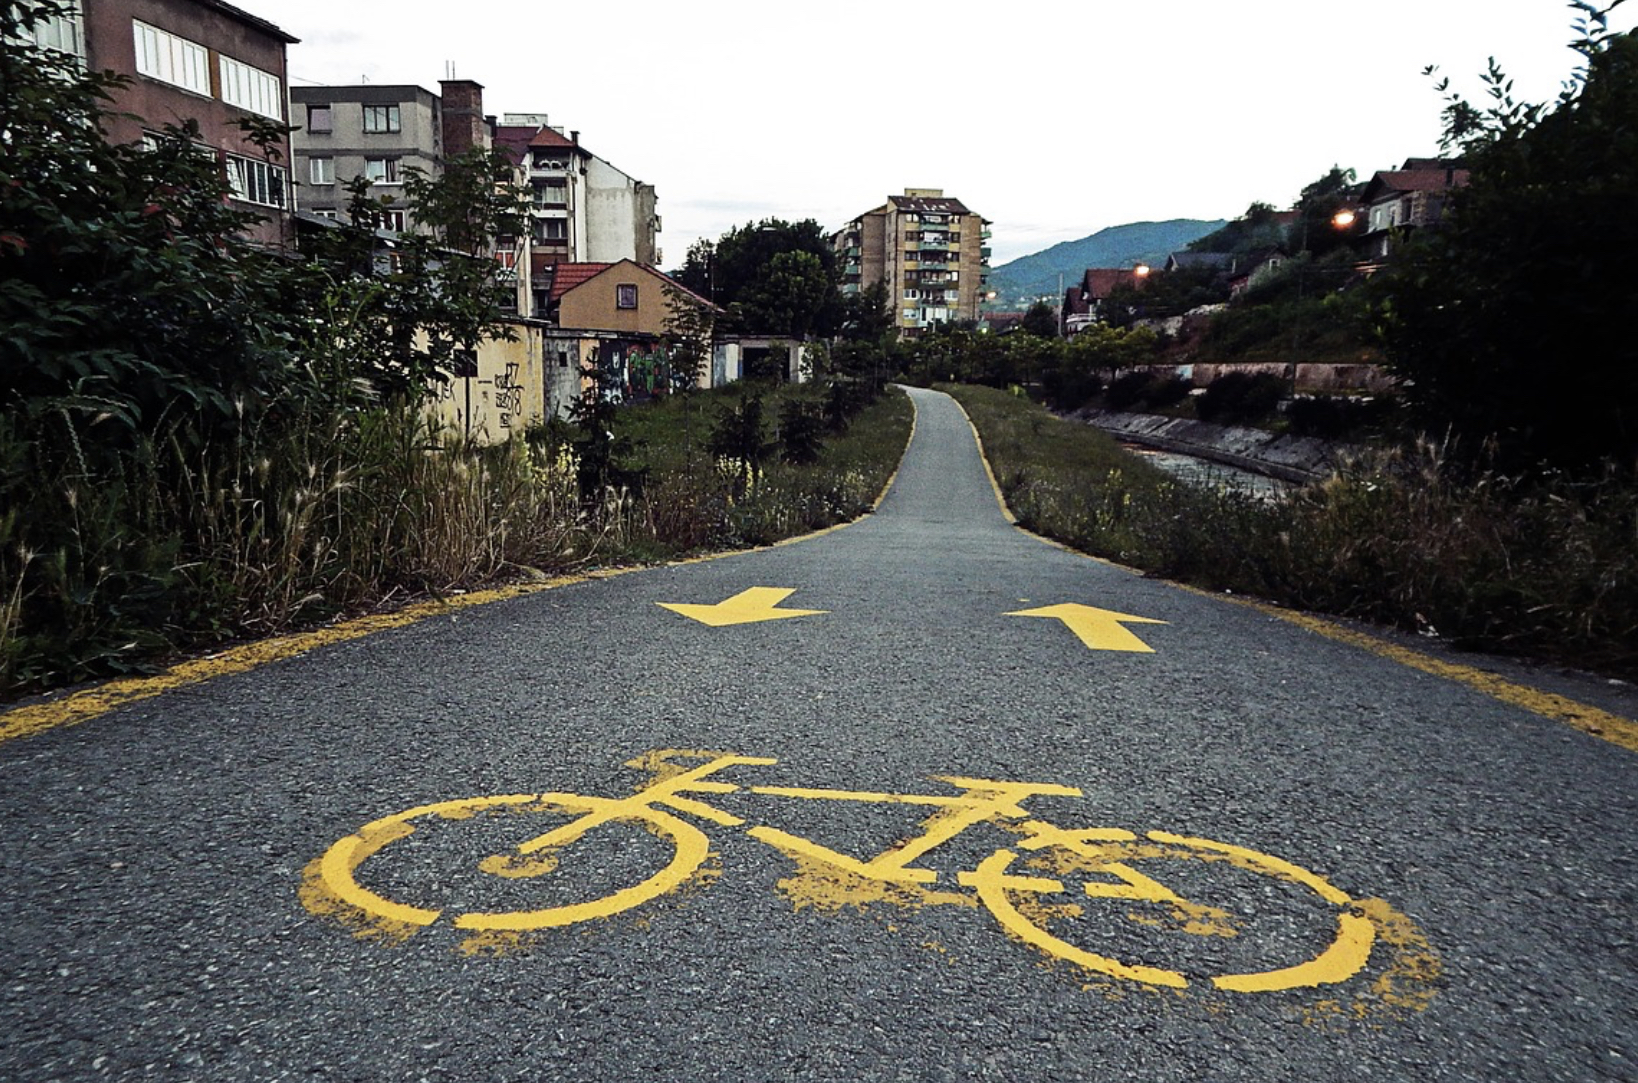 Cycle path for your daily ride